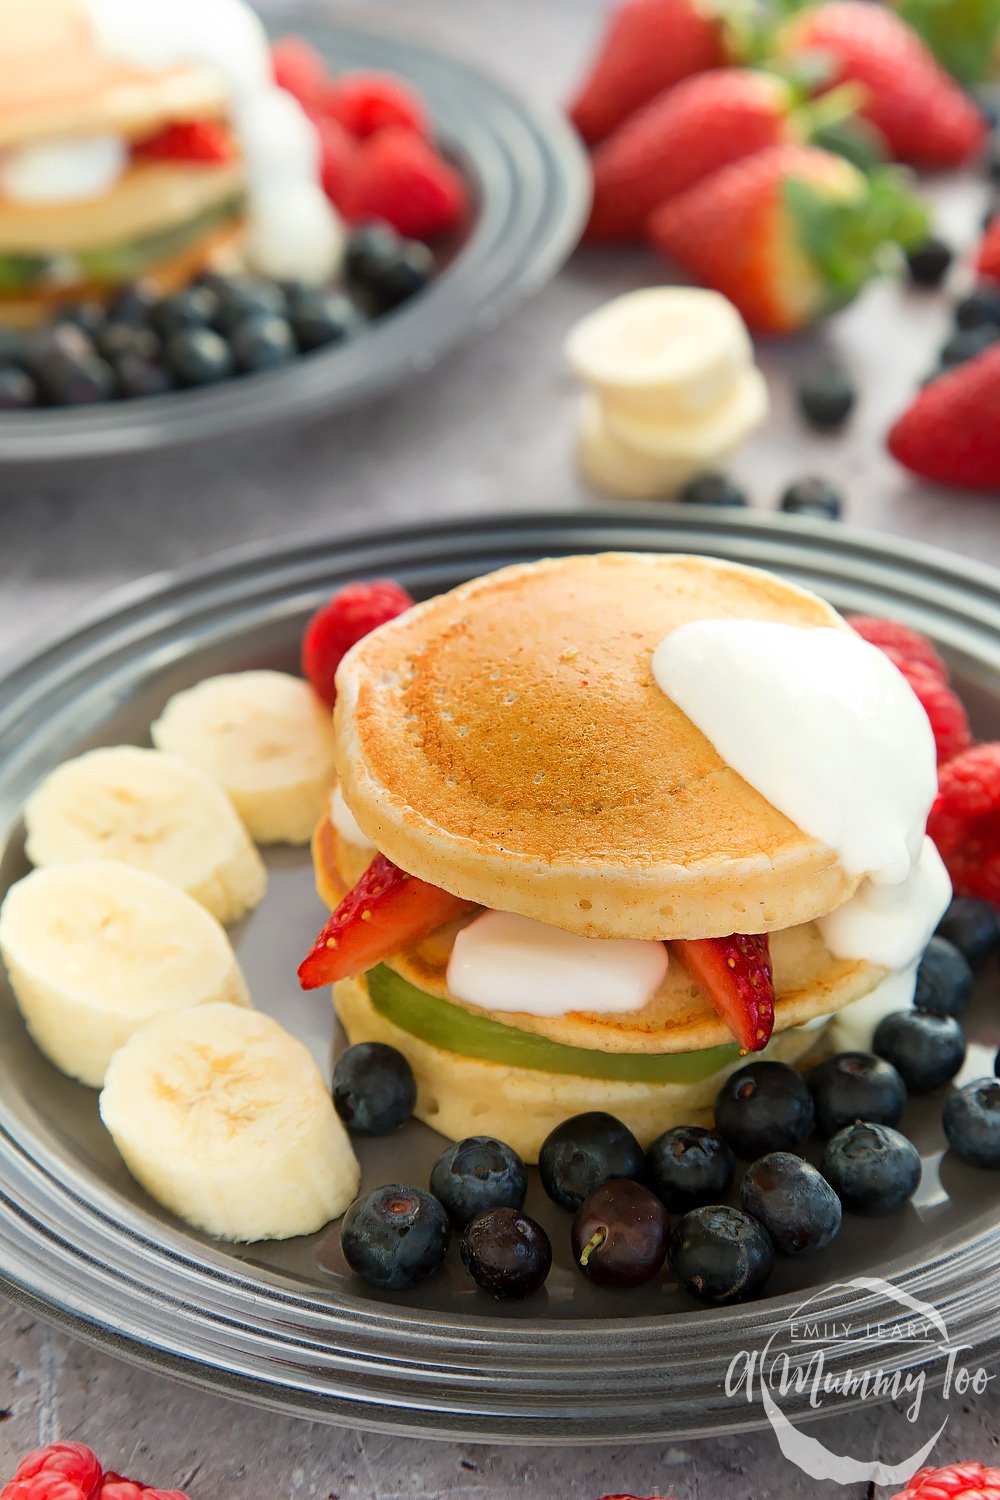 This pretty fruity pancake stack is delicious, healthy and a great way to brighten up breakfast